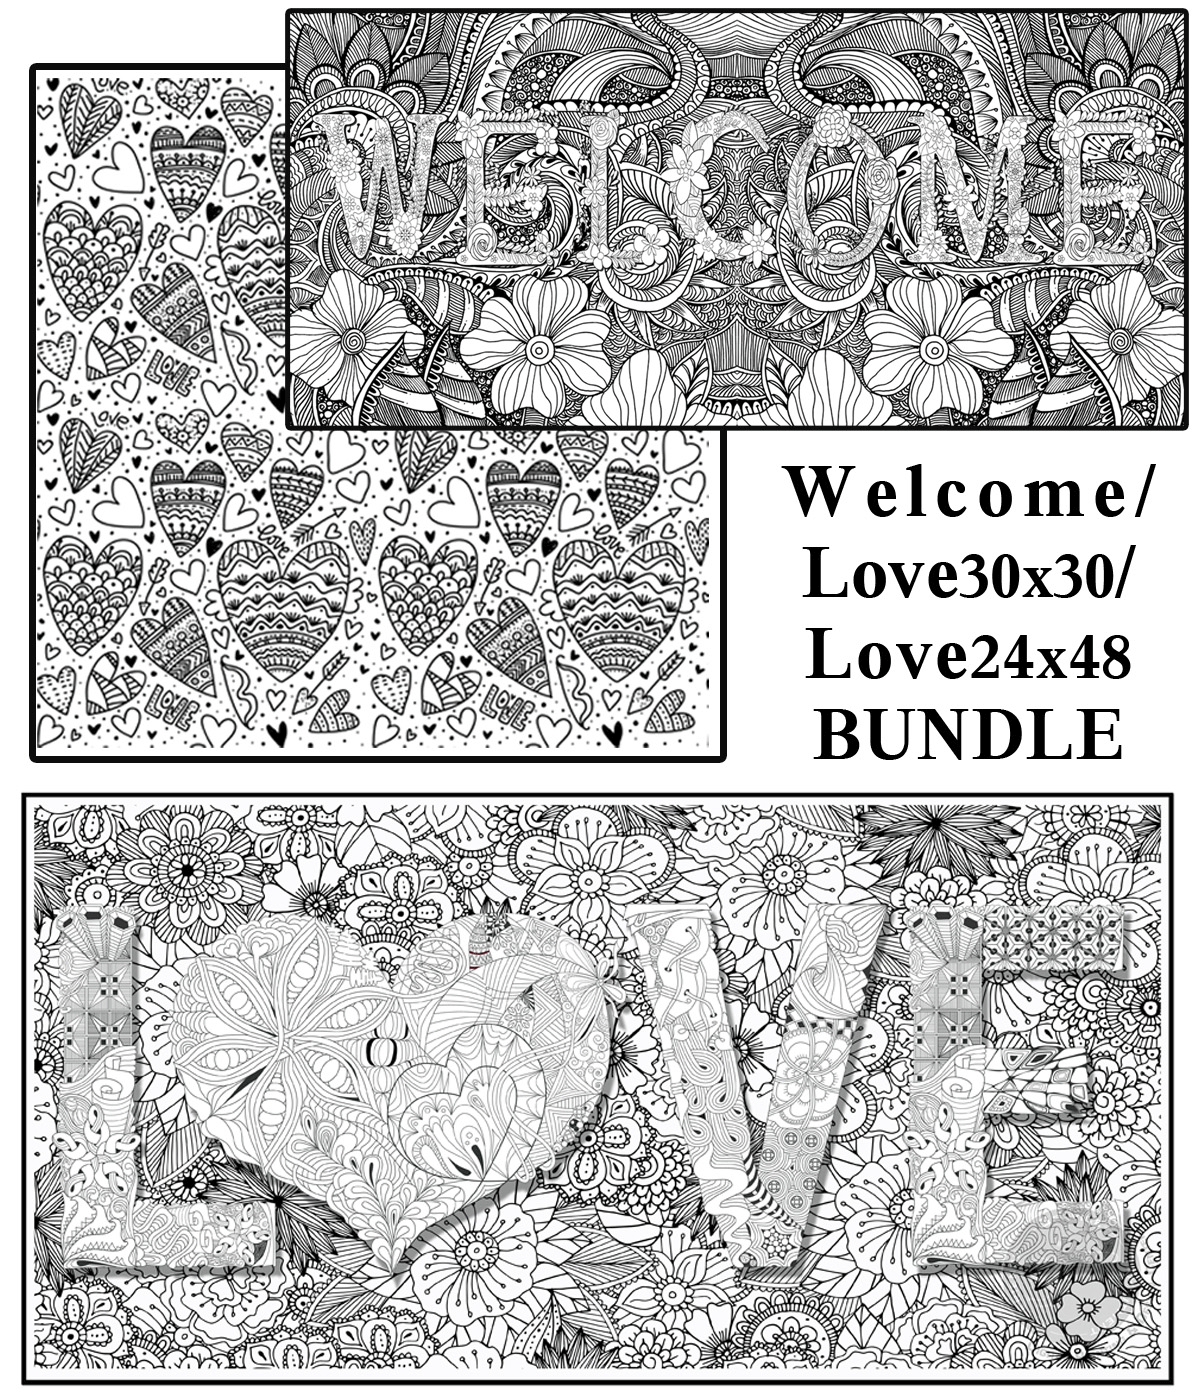 Welcome/Love/Love- 3 Posters for $64.99 - SJPrinter 